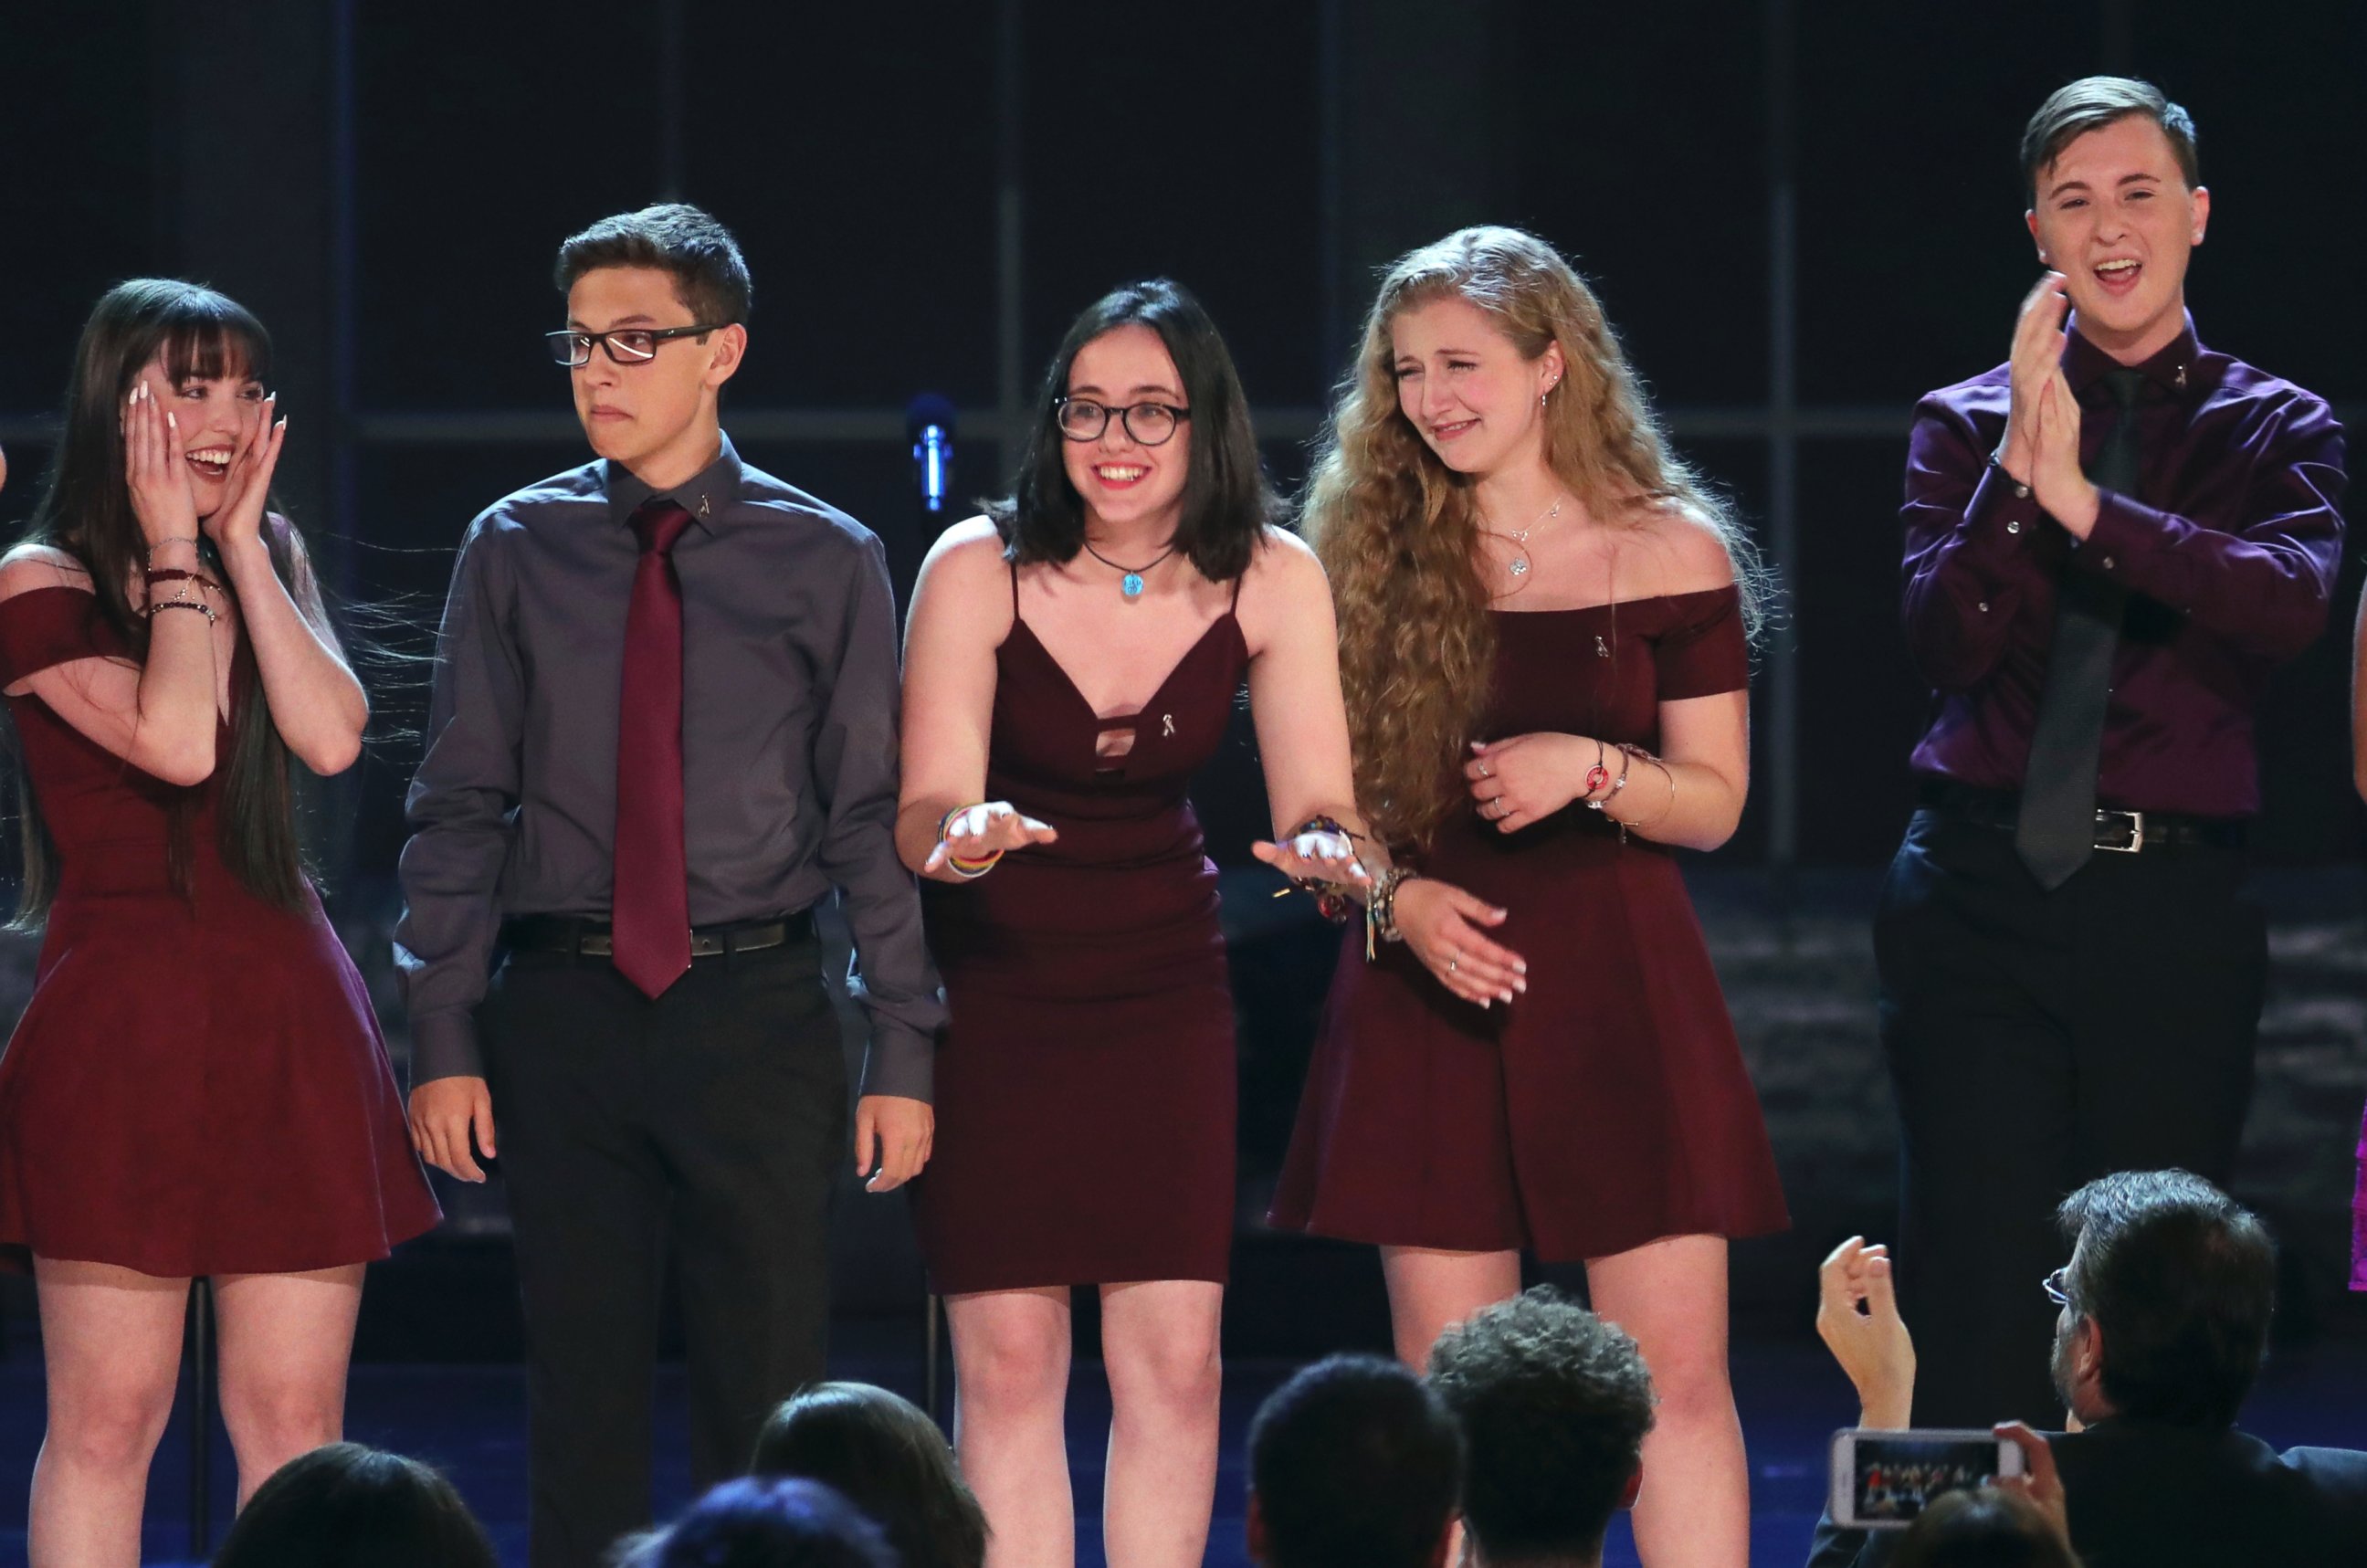 Students from the Marjory Stoneman Douglas High School drama department react after performing "Seasons of Love" at the 72nd annual Tony Awards at Radio City Music Hall on Sunday, June 10, 2018, in New York.